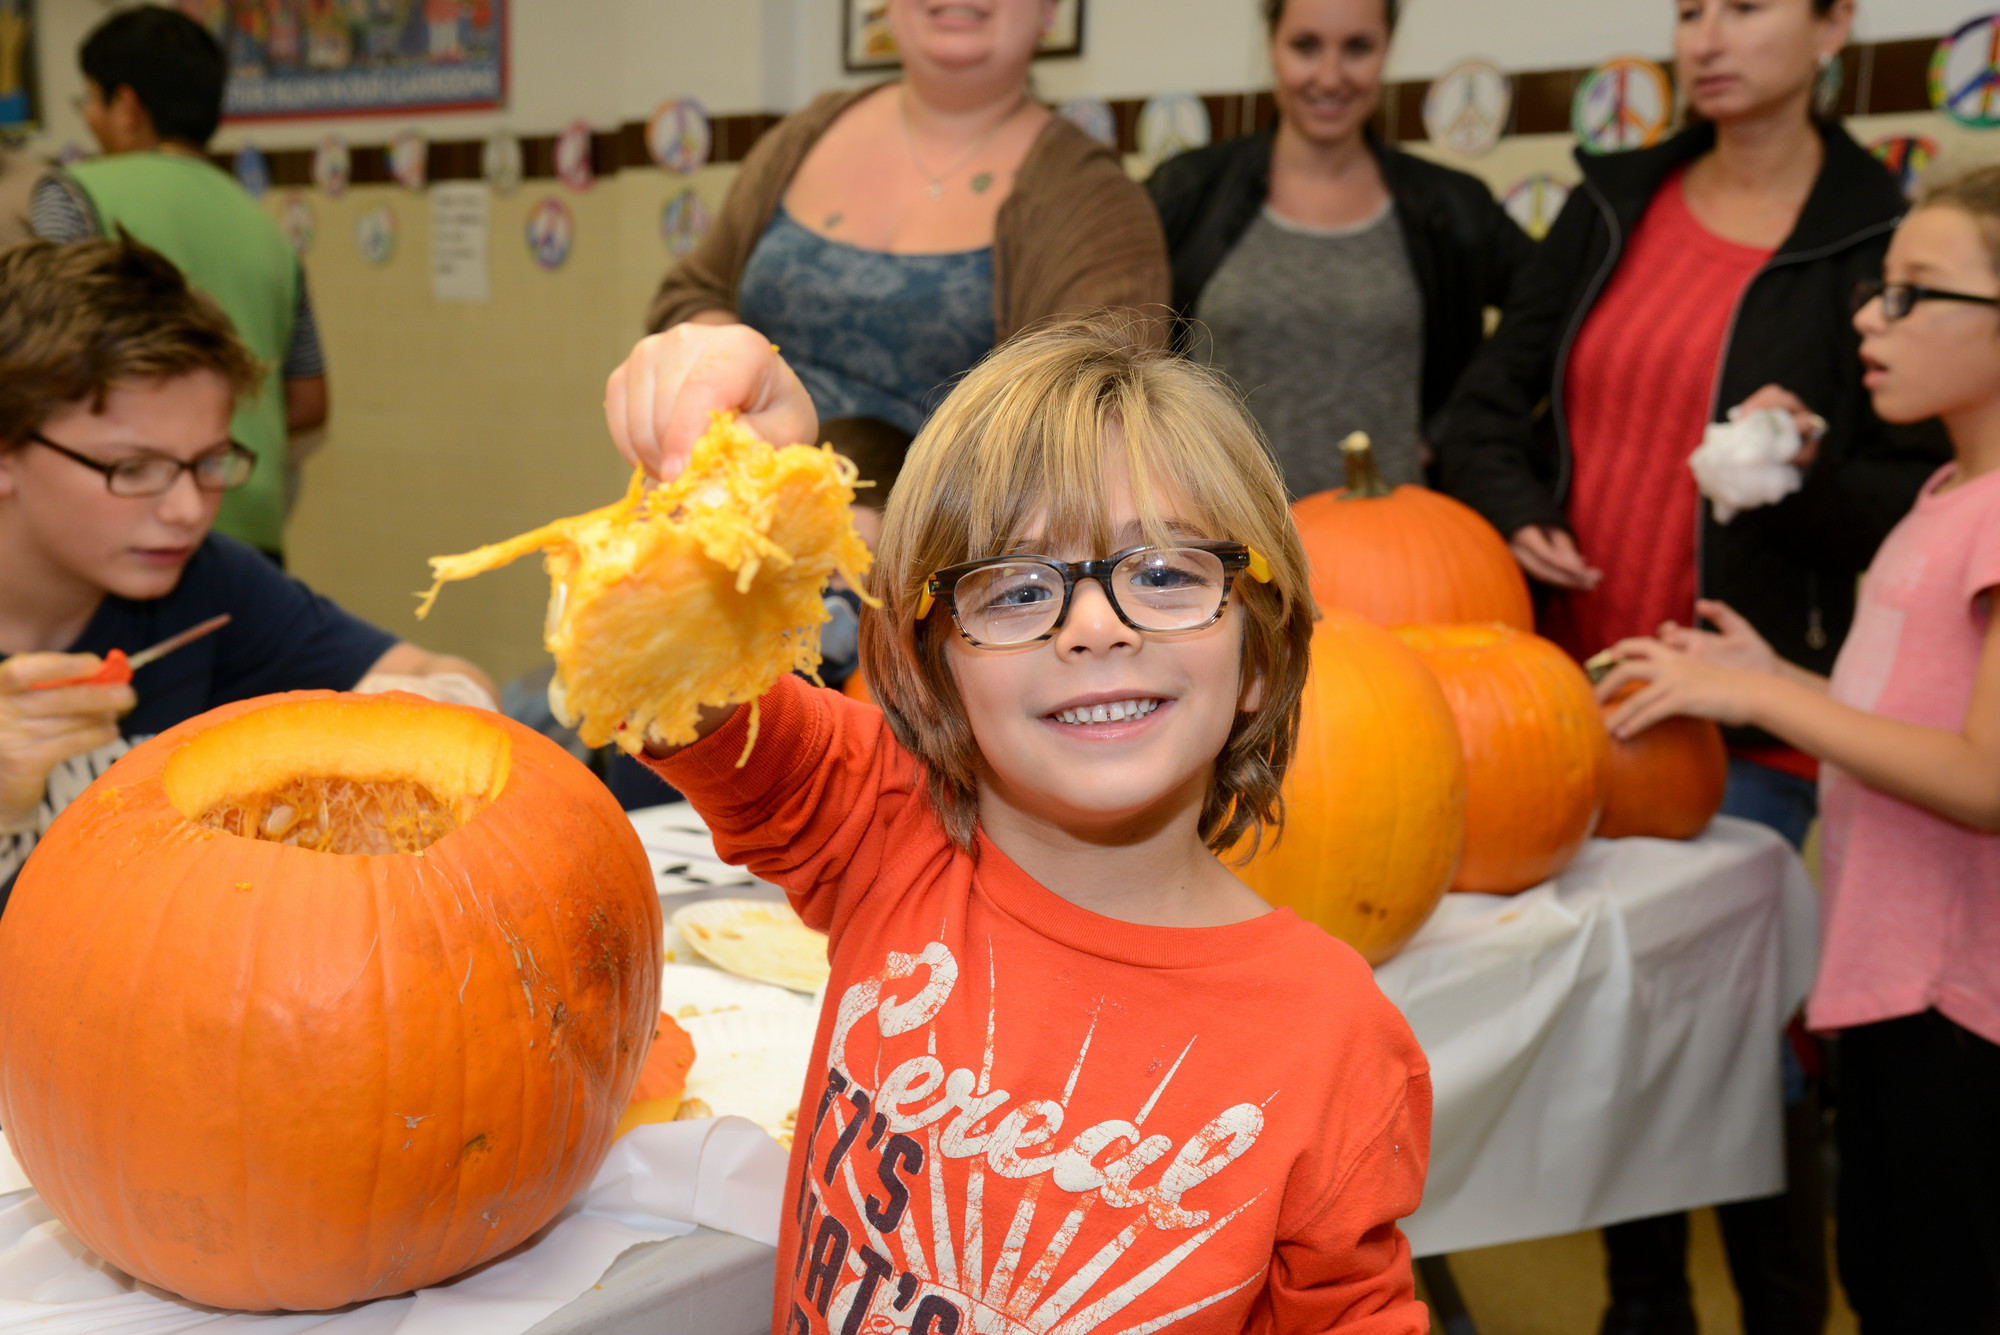 Harley Morgan, 5, knew that the first step in carving a pumpkin is to scalp the pumpkin.